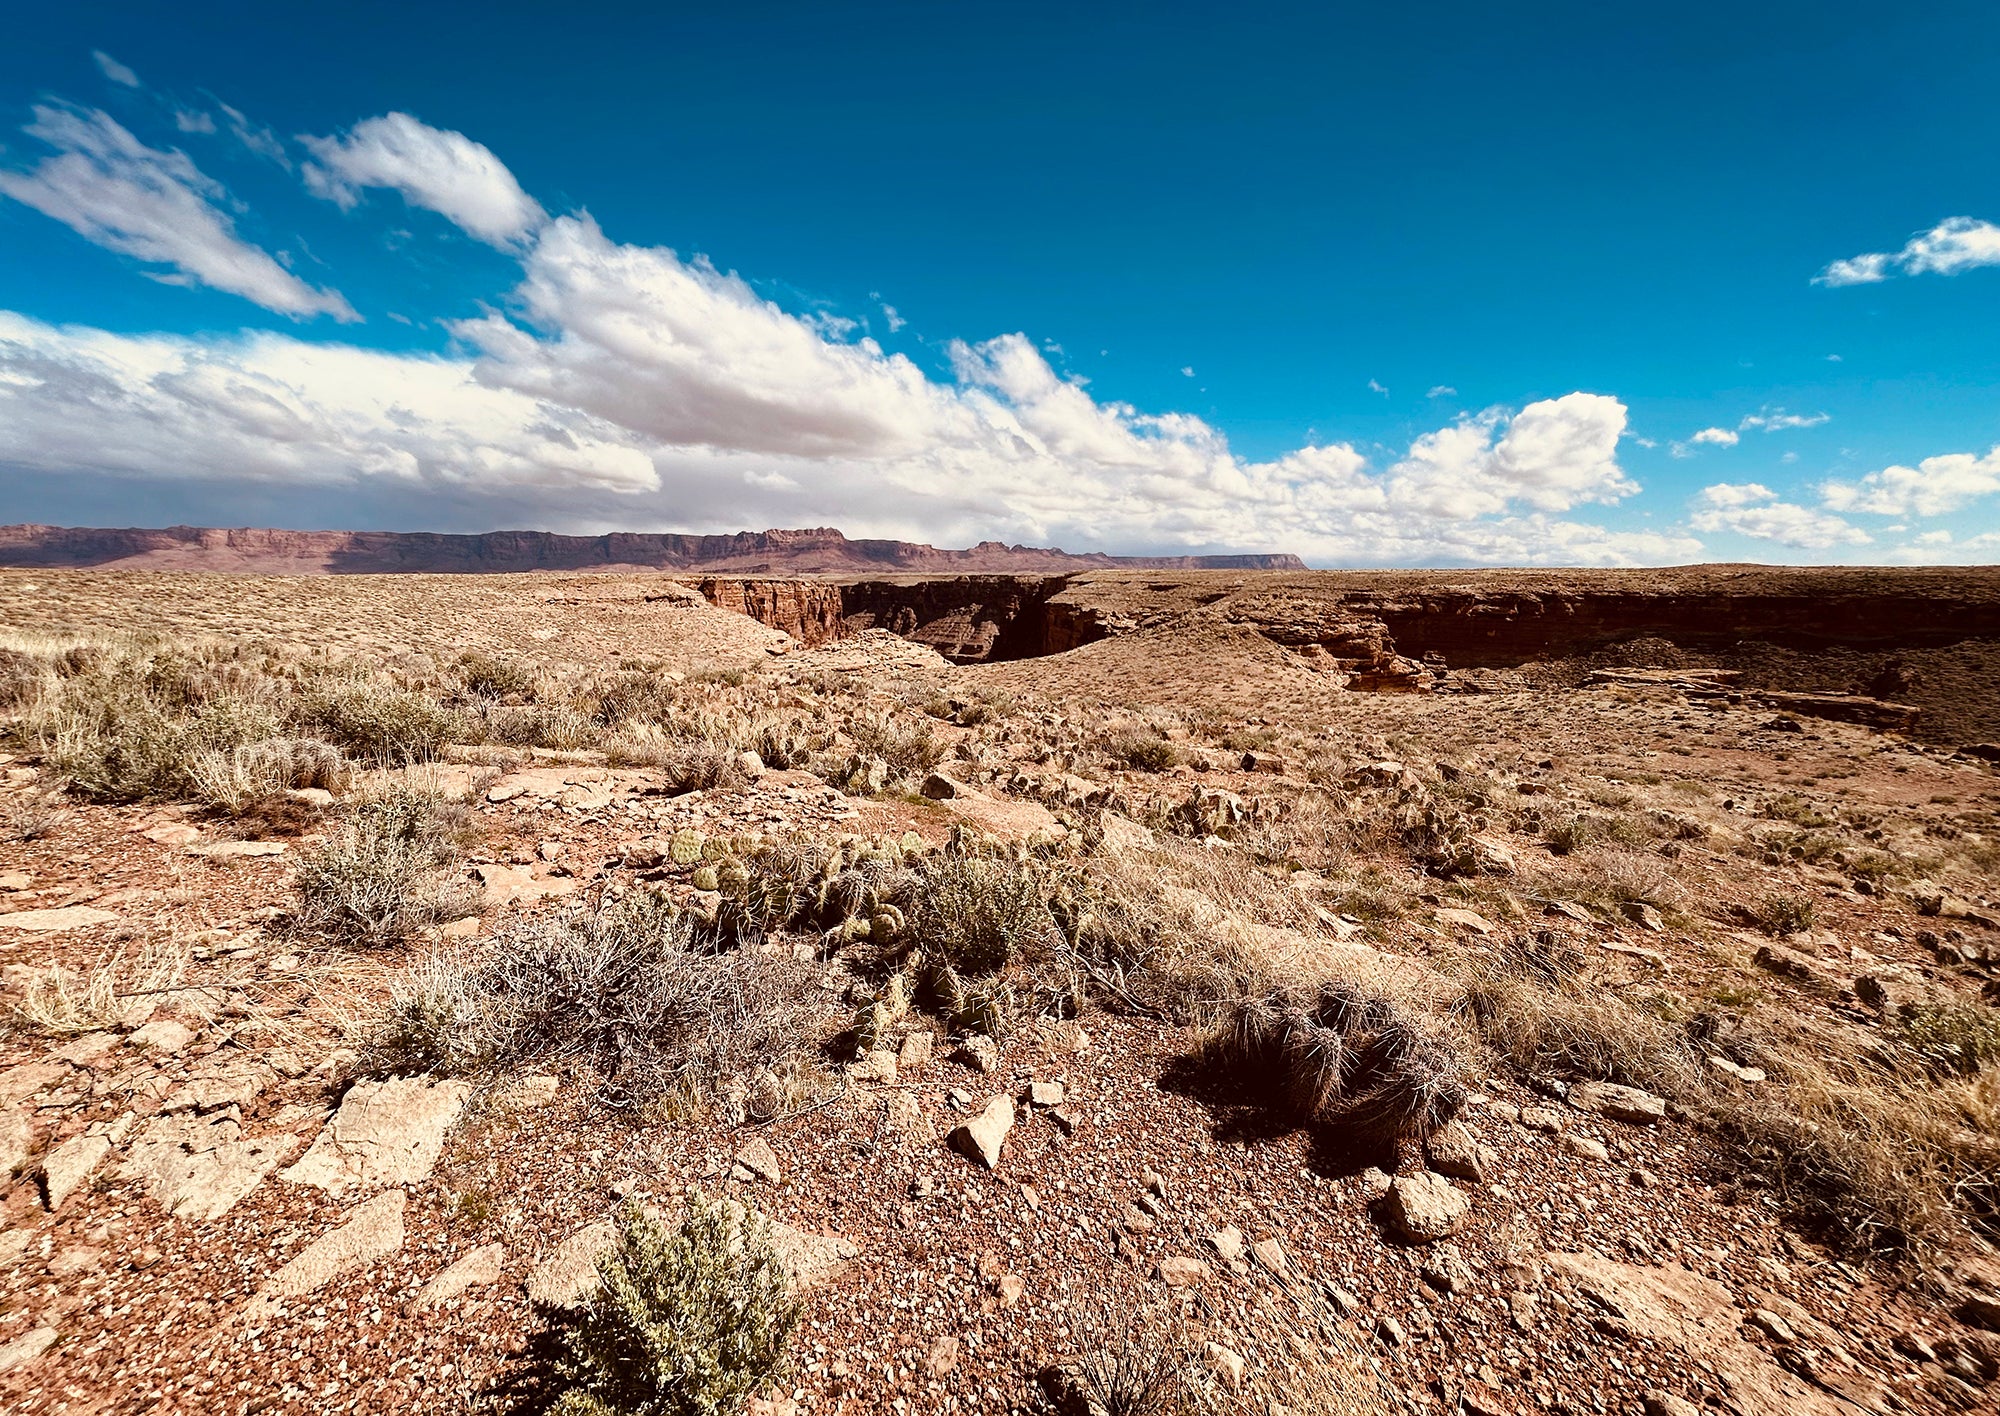 A flat desert landscape with cactus plants in the foreground, a small canyon in the middle distance and taller mesas on the horizon. White clouds contrast with a blue sky.